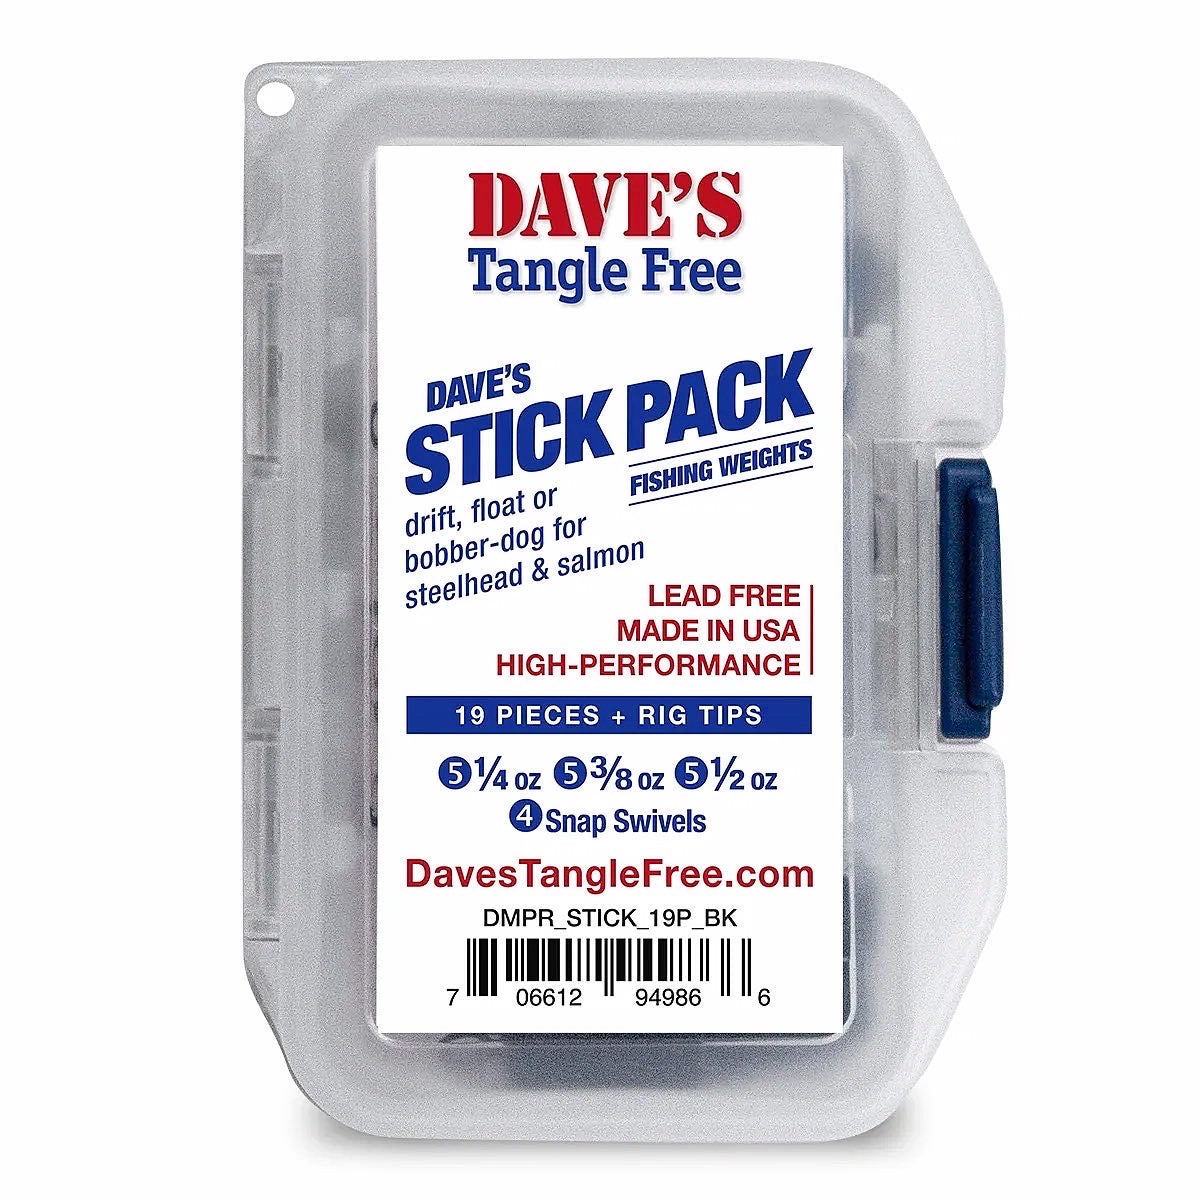 Dave's Tangle Free Stick Pack – Never Quit Fishing